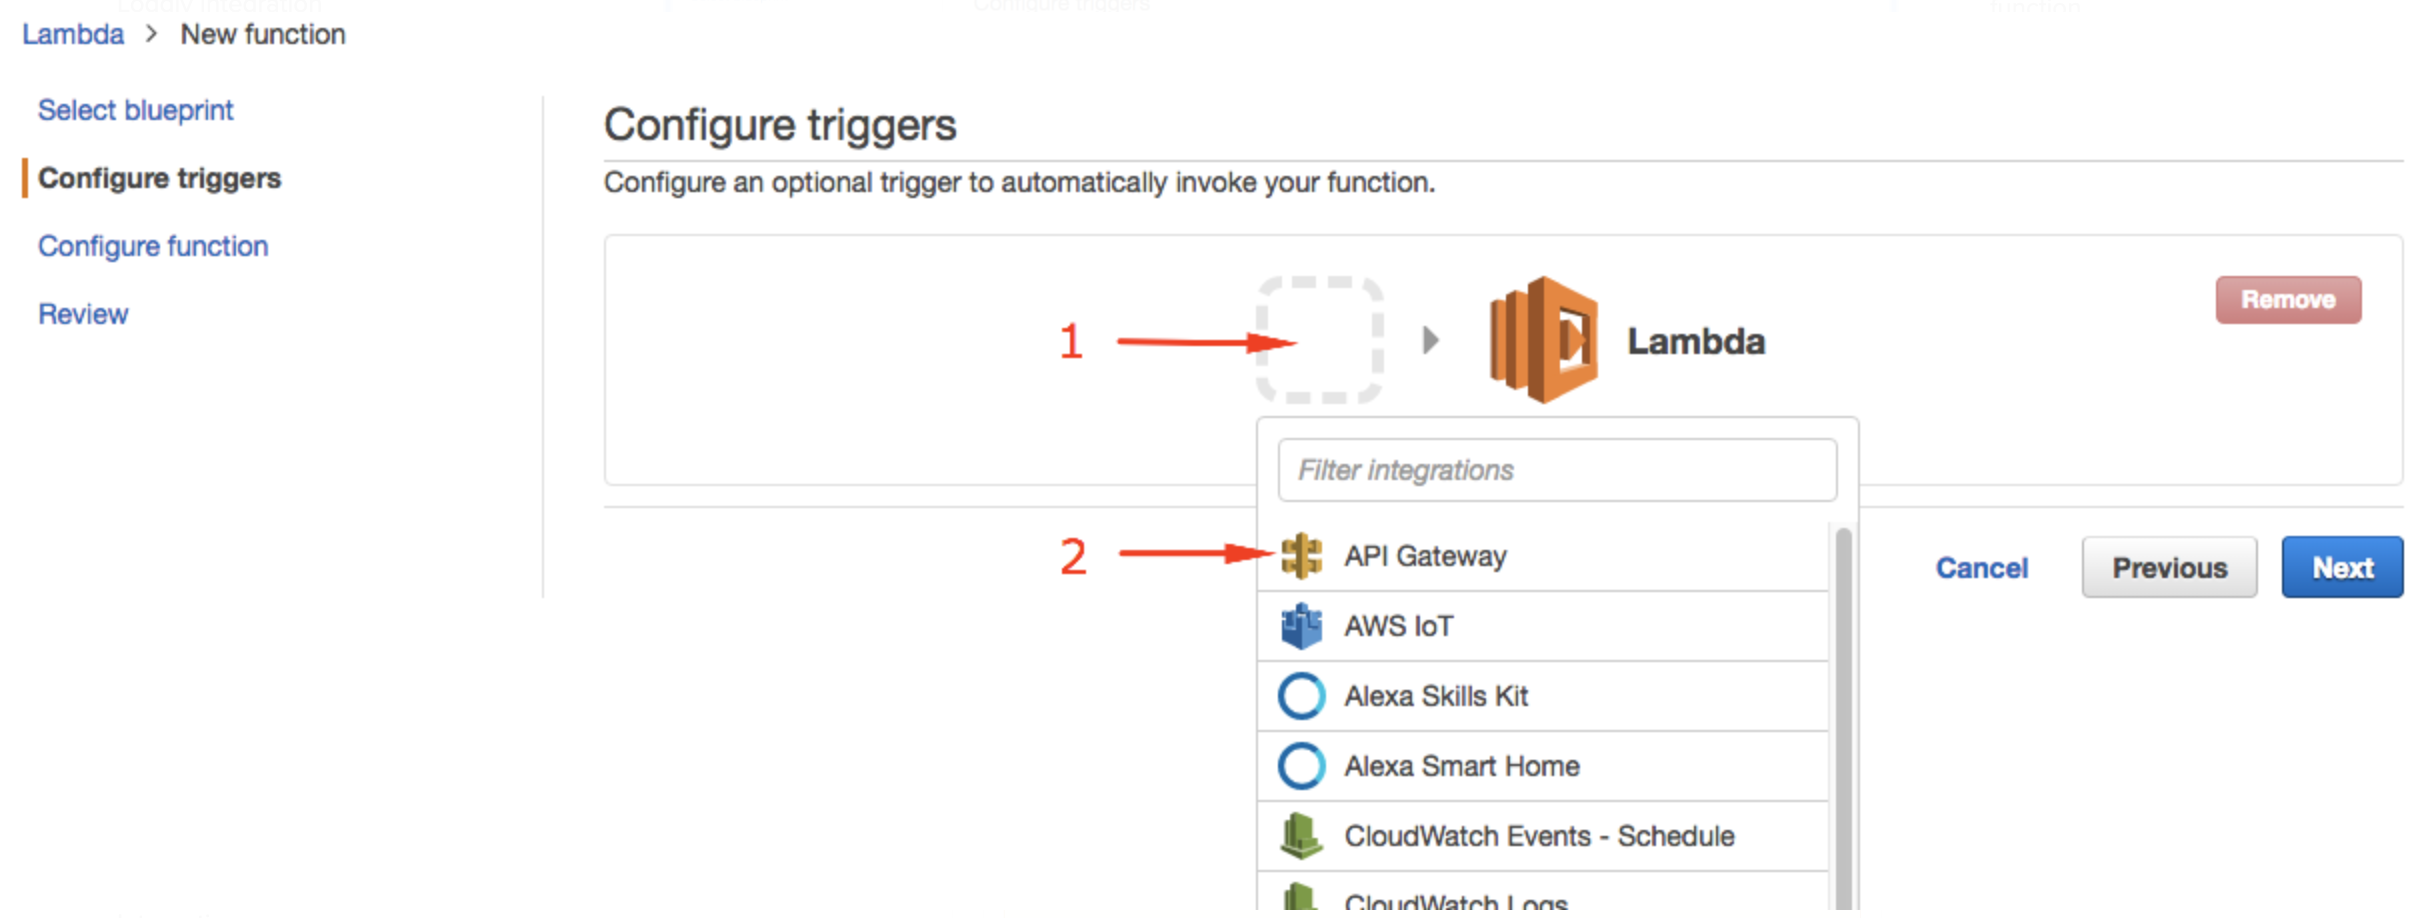 An image showing API gateway option in Lambda's configure triggers options.